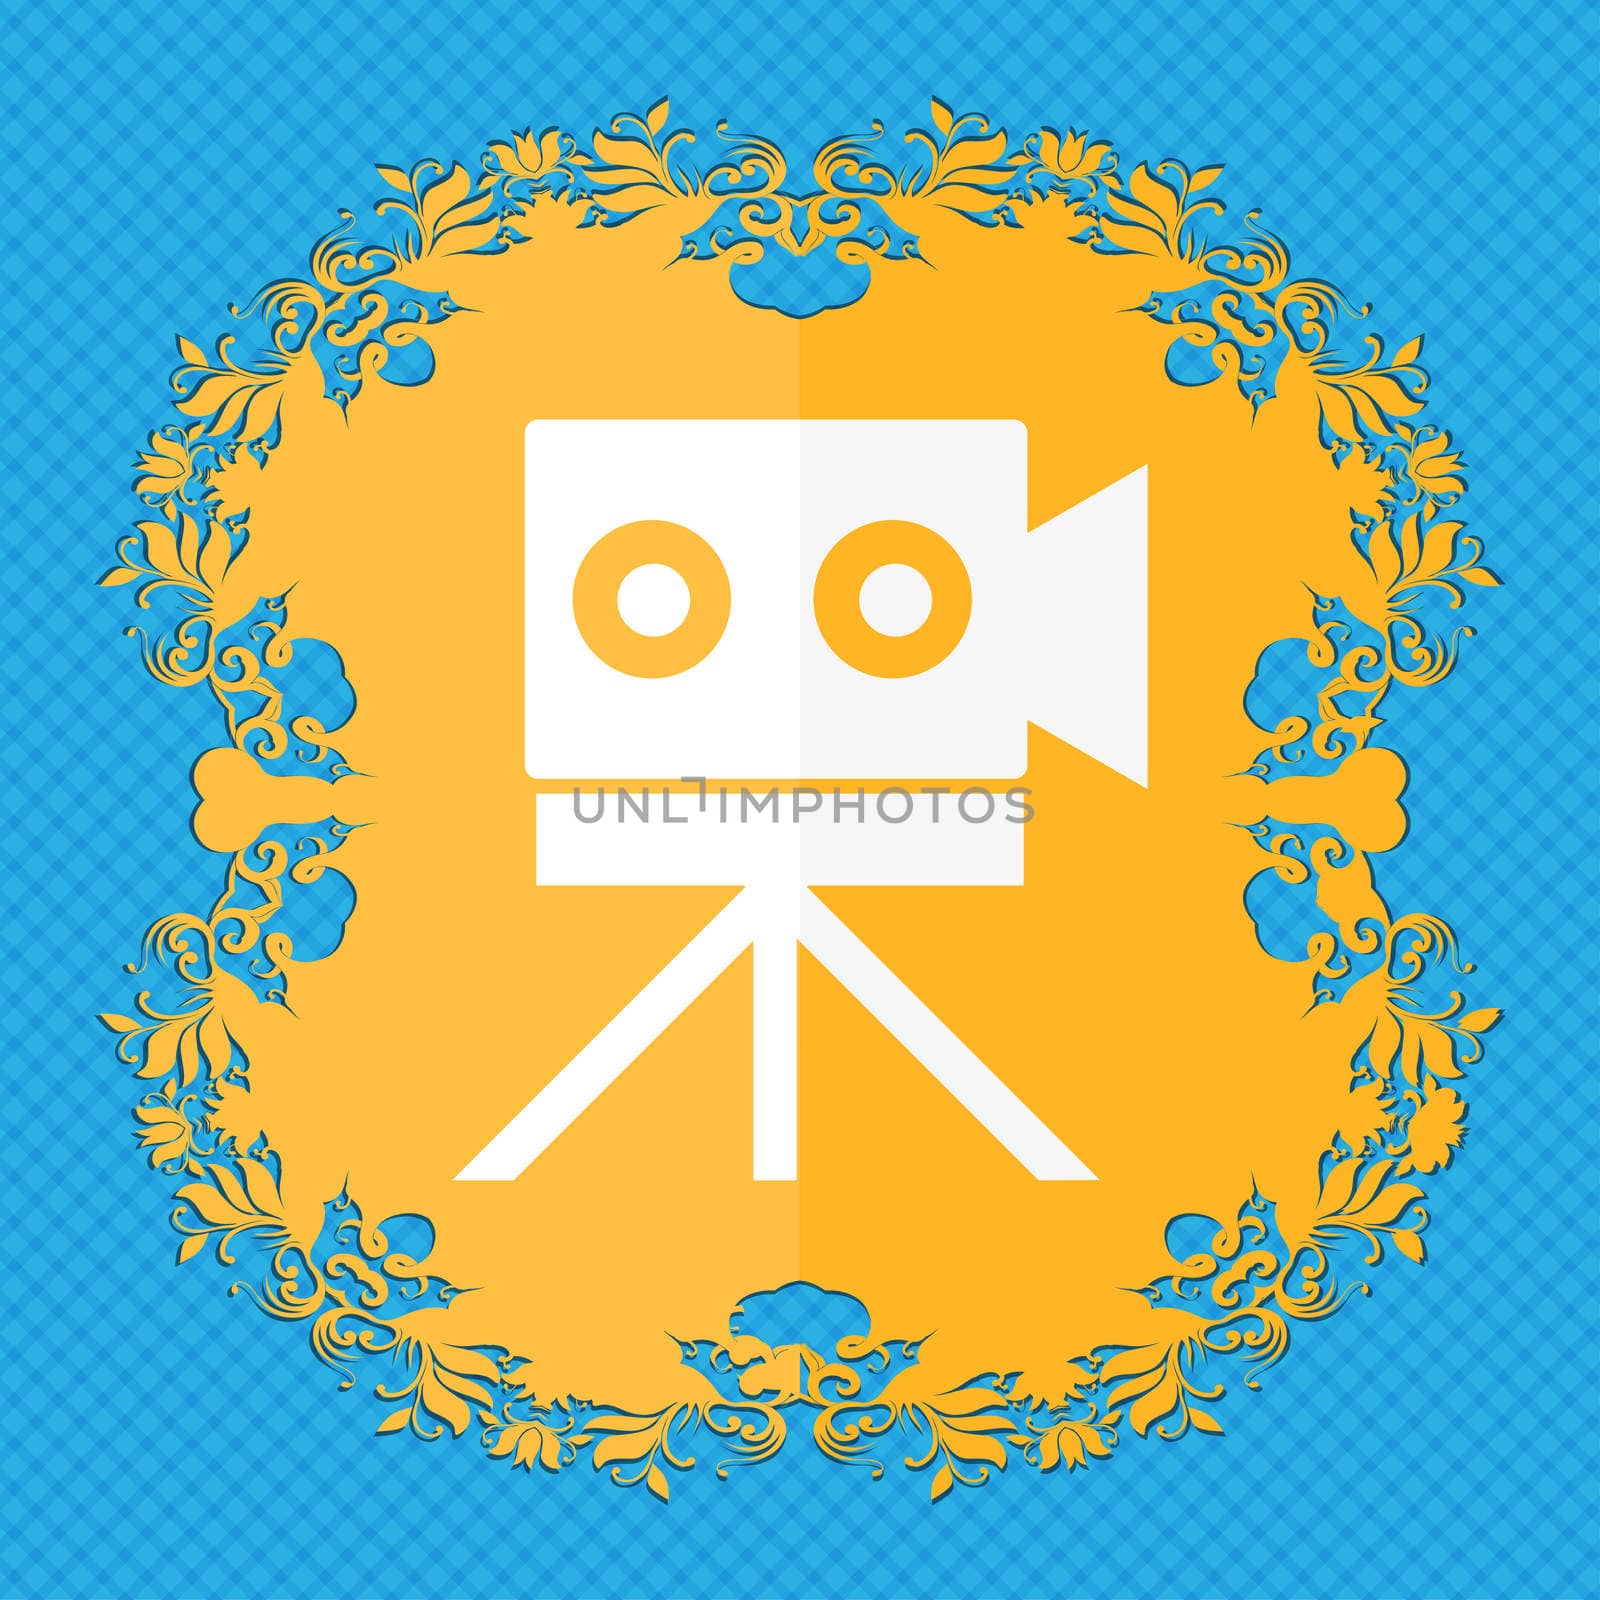 Video camera sign icon.content button. Floral flat design on a blue abstract background with place for your text. illustration